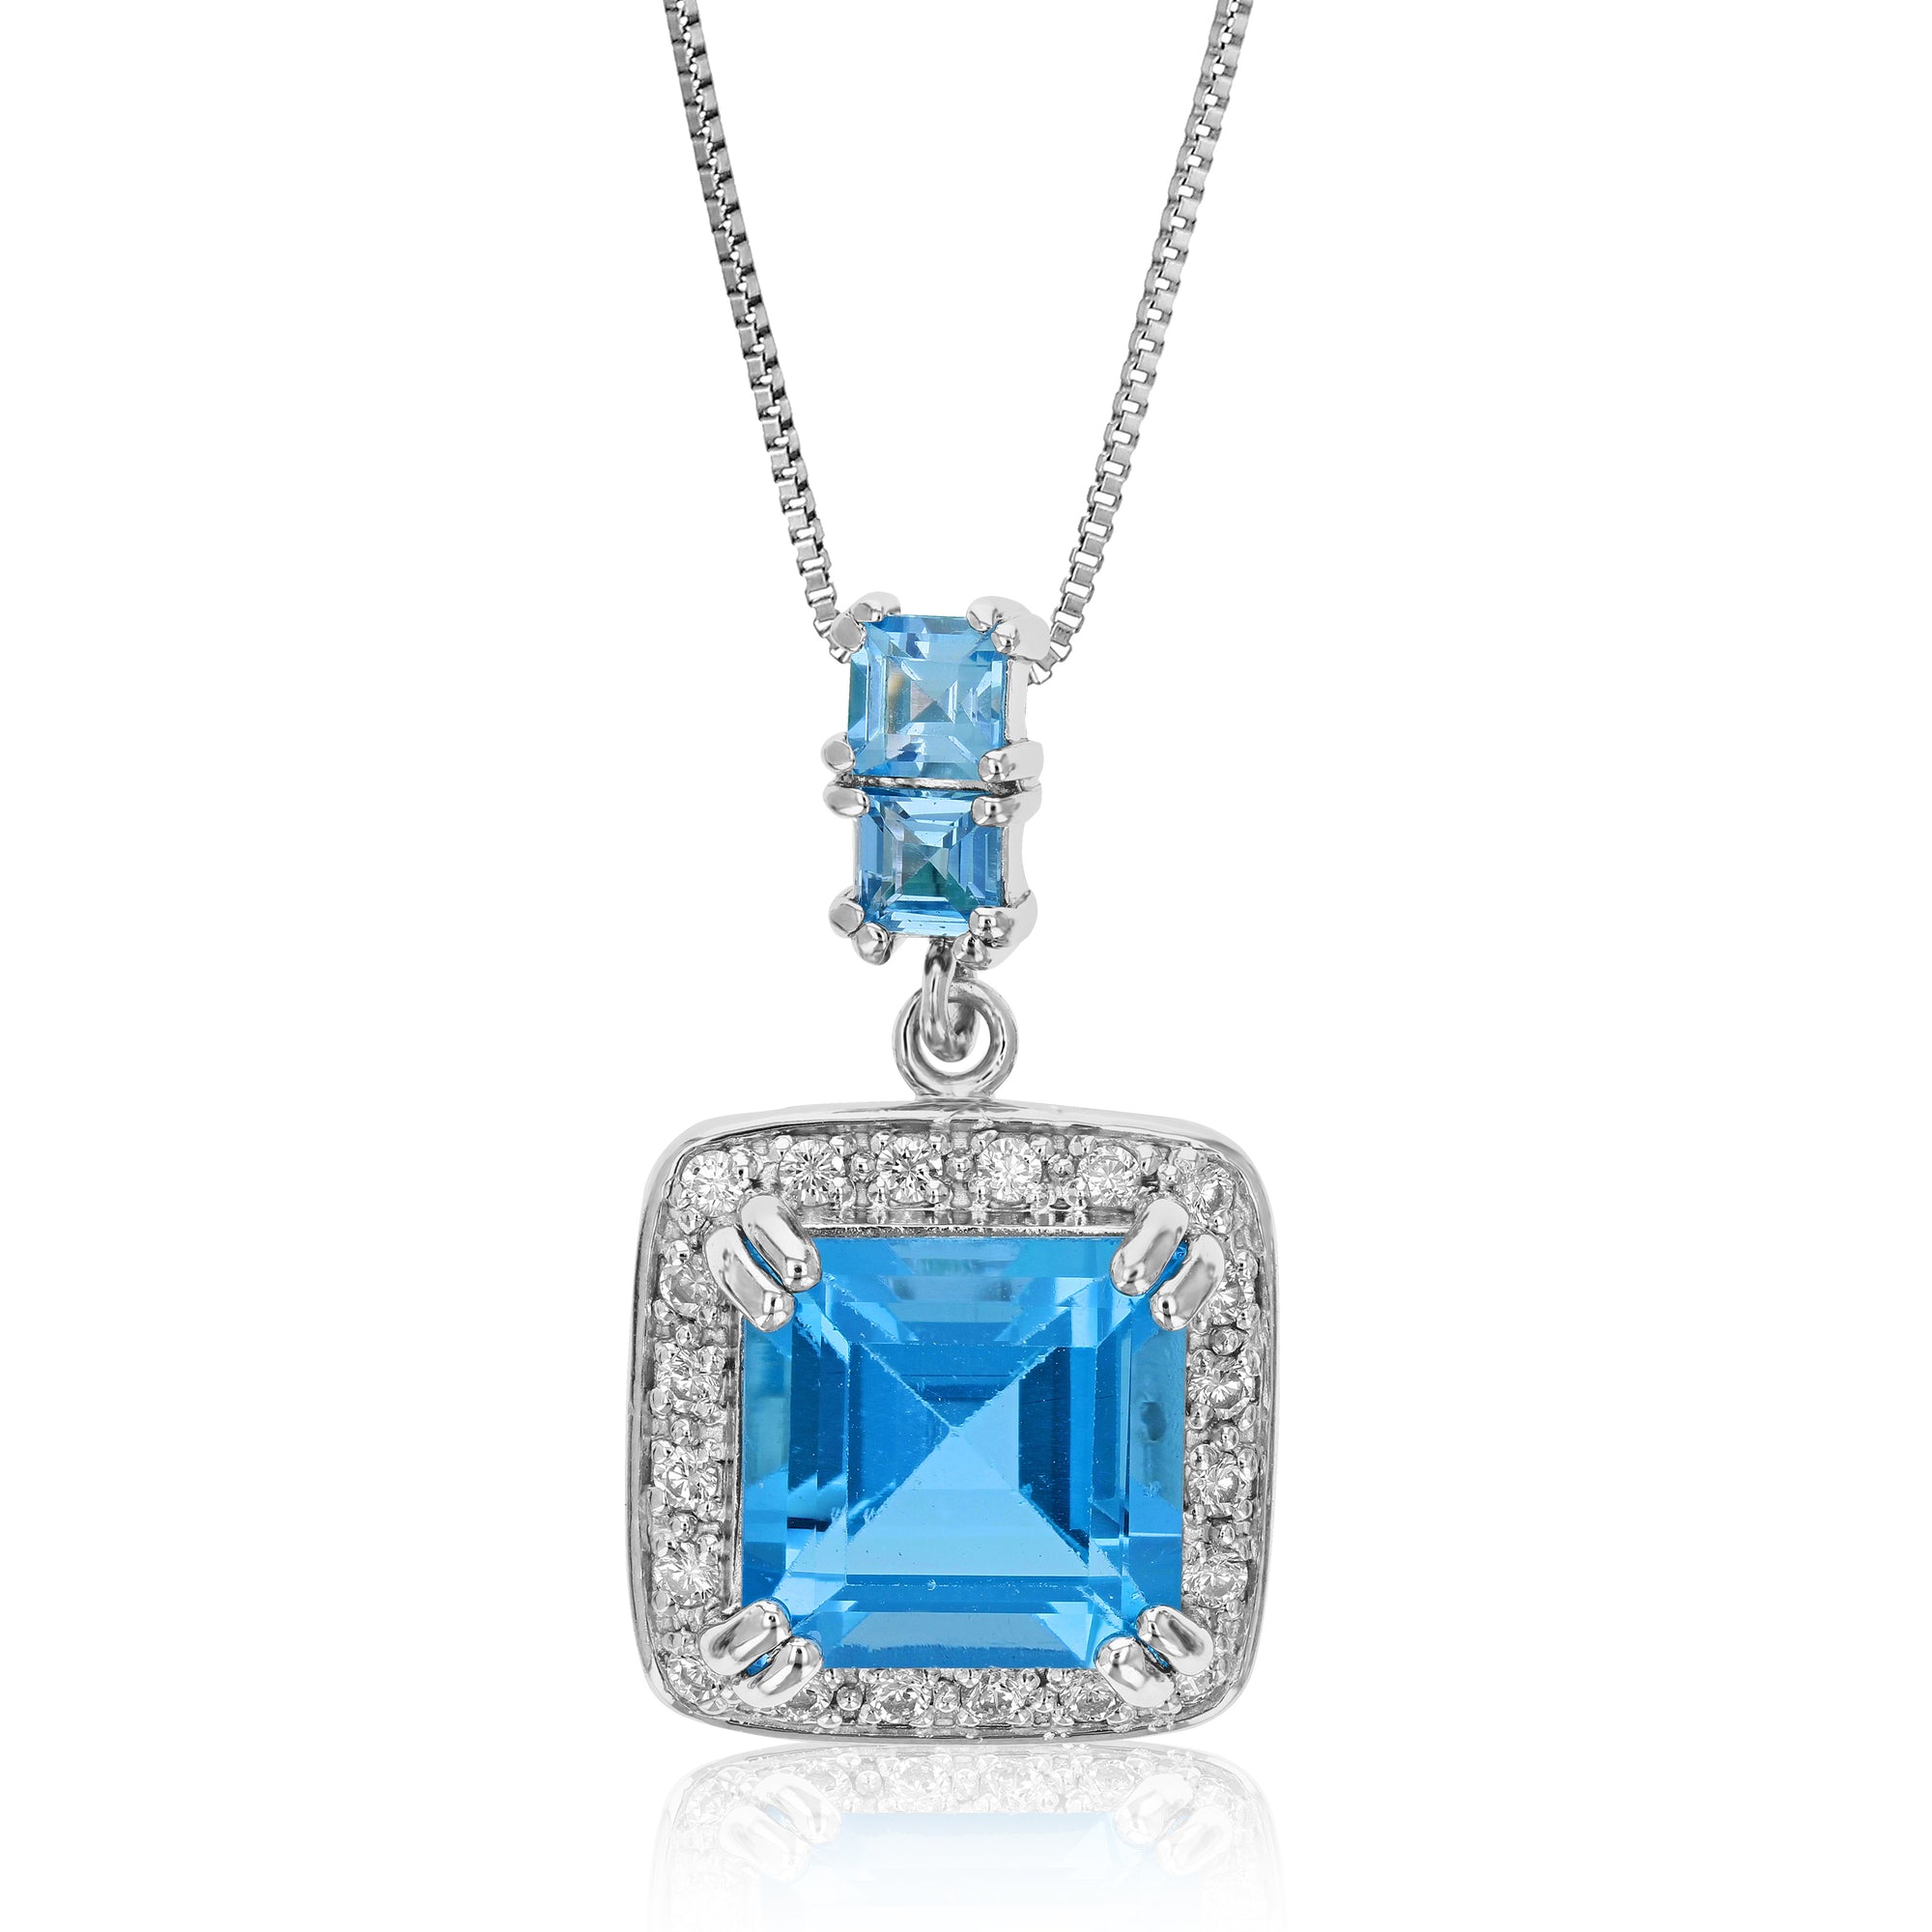 4.30 cttw Pendant Necklace, Swiss Blue Topaz Pendant Necklace for Women in .925 Sterling Silver with Rhodium, 18 Inch Chain, Prong Setting